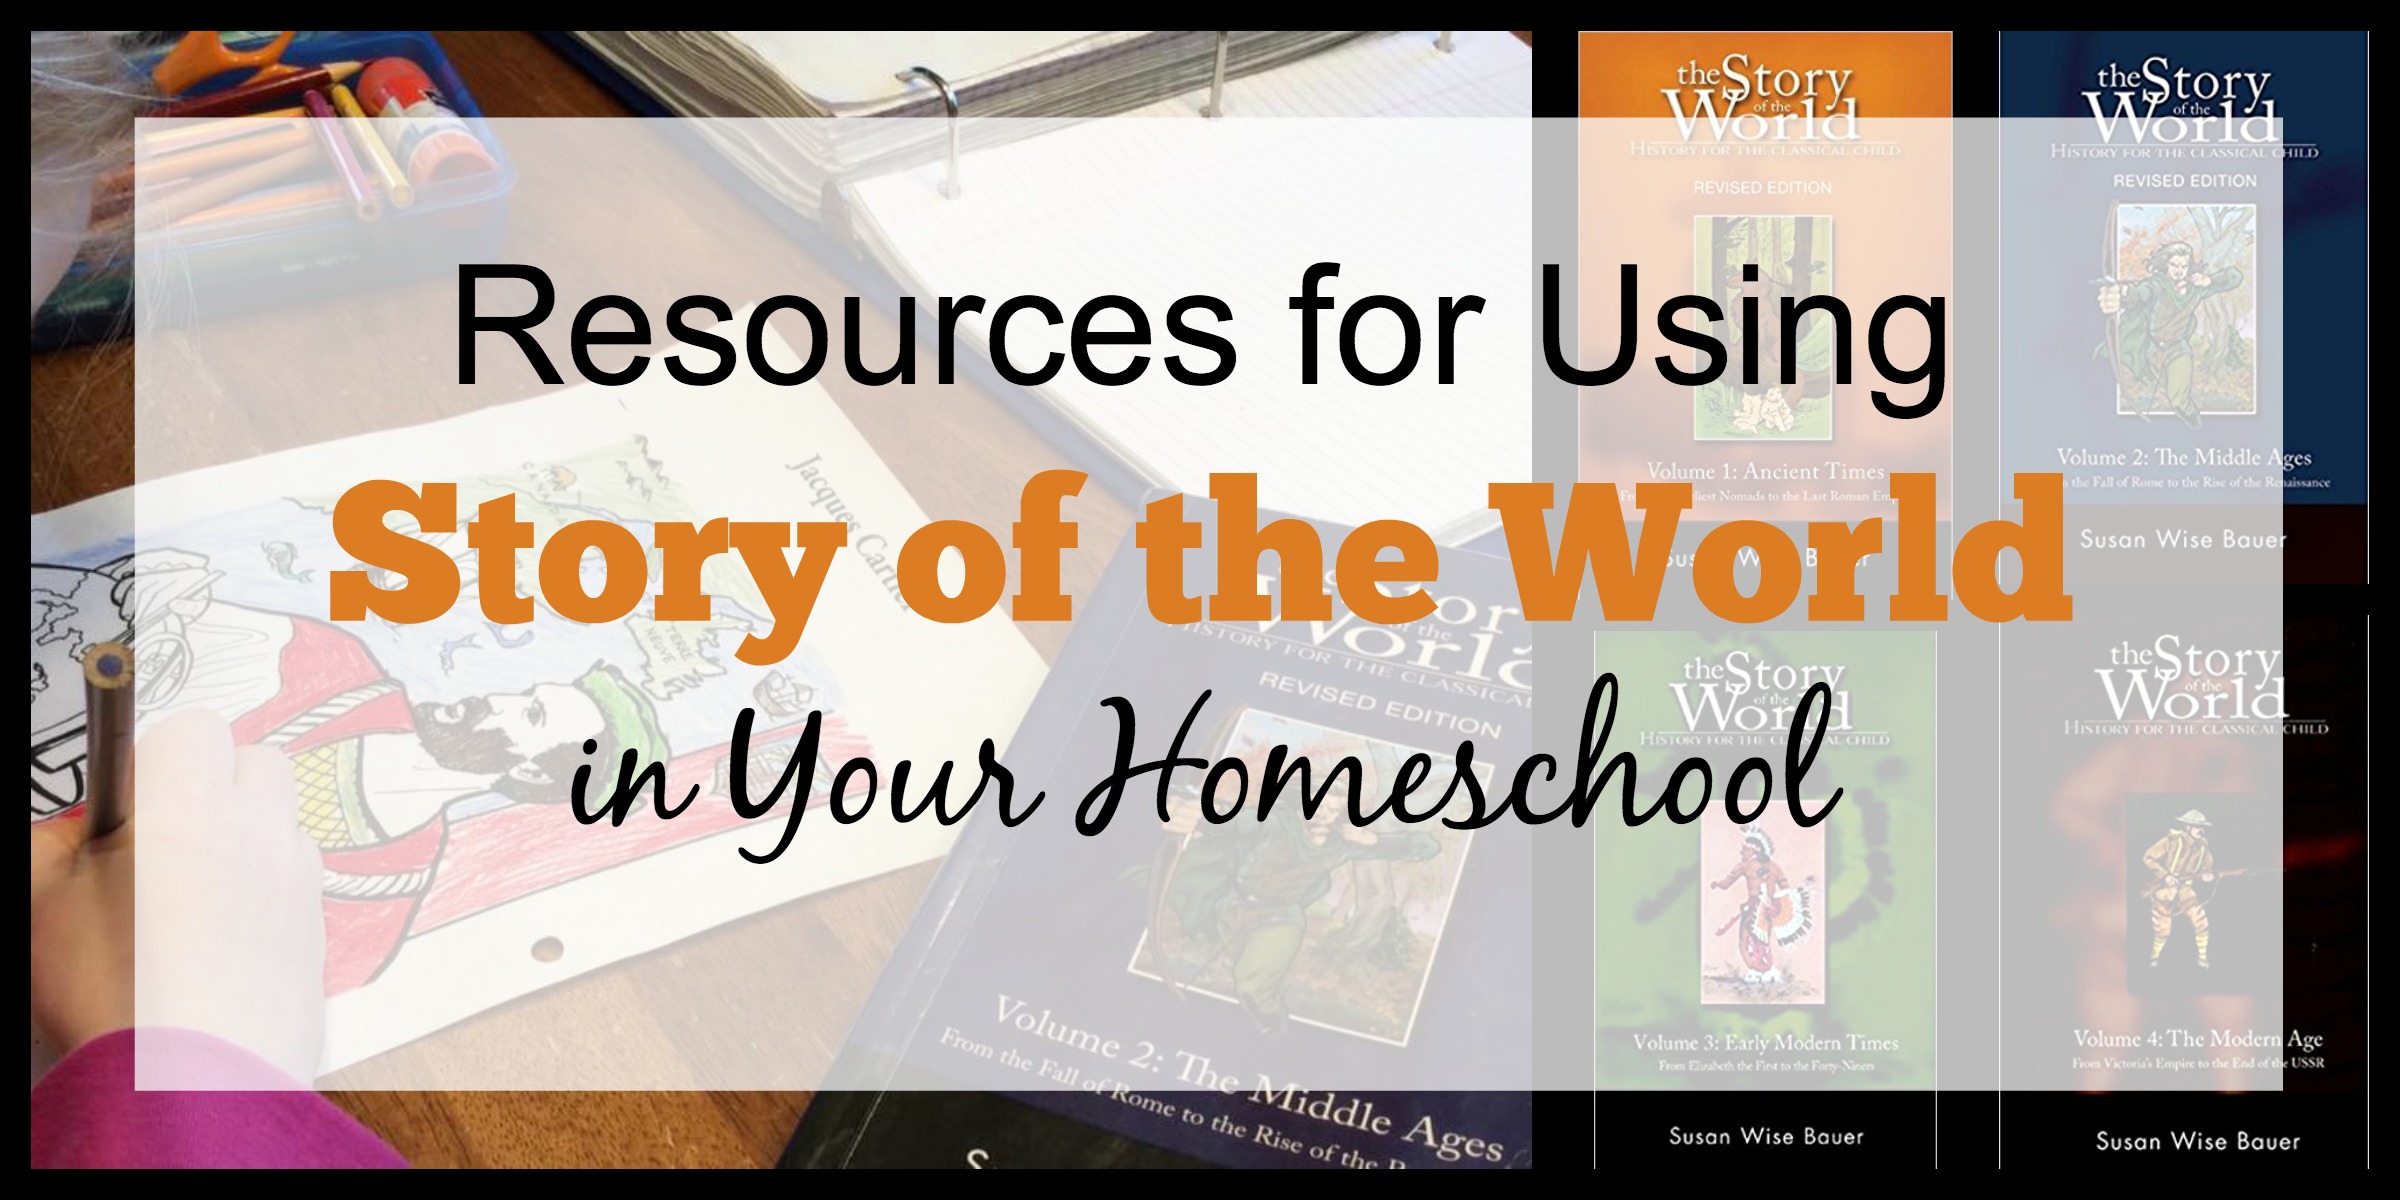 The Ultimate Guide to Using Story of the World in Your Homeschool - exhaustive list of resources for SOTW booklists, lapbooks, timelines, notebooking, and more!